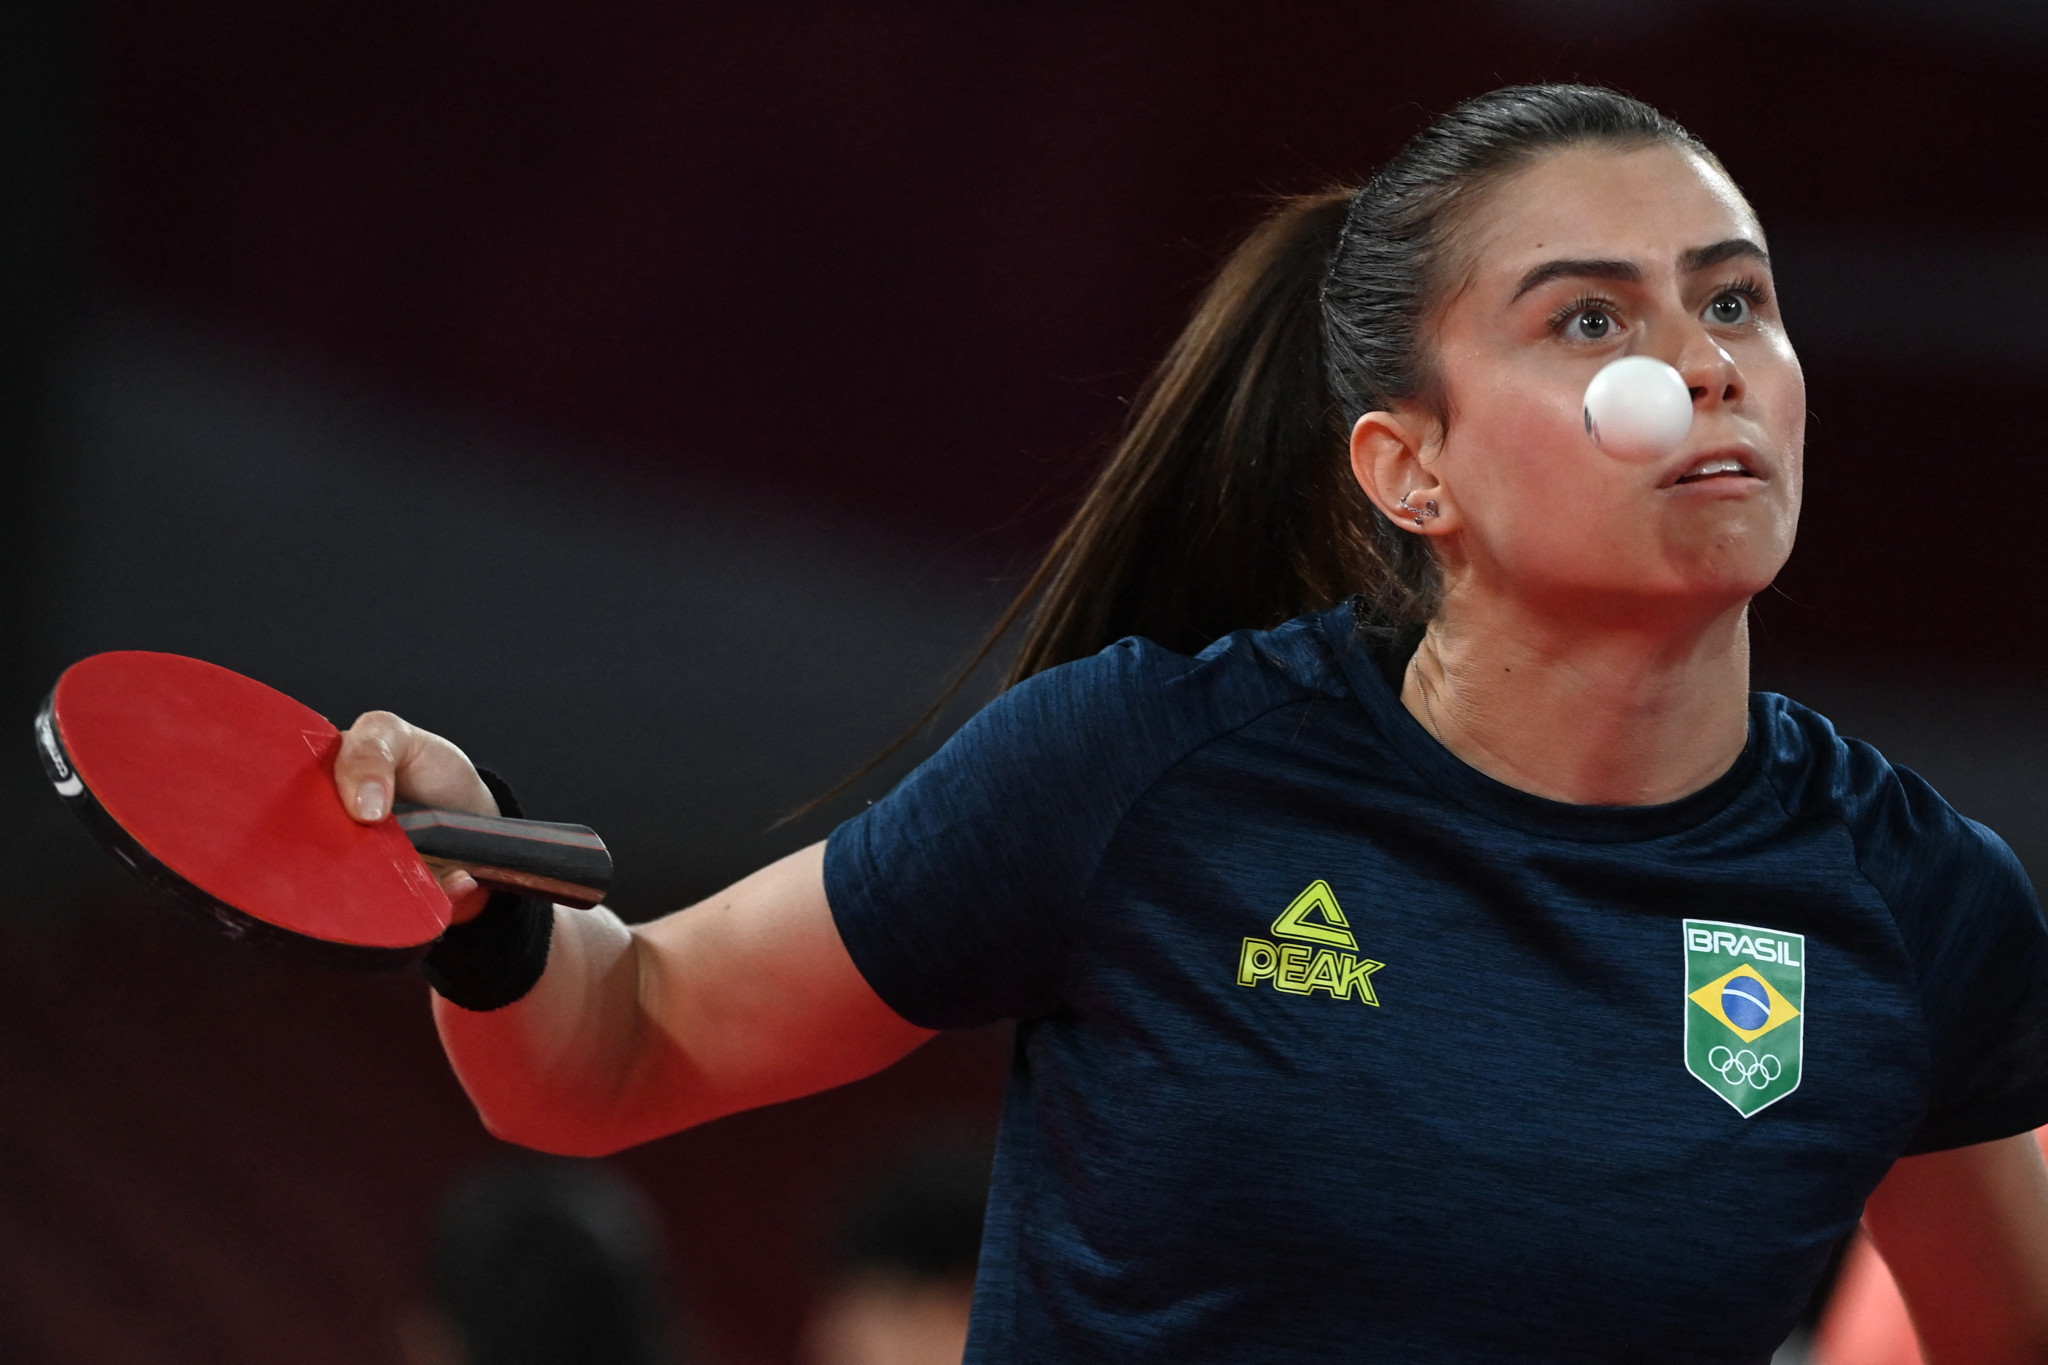 Brazil's Bruna Takahashi has won a silver and two bronze medals at the ITTF Pan American Championships women's singles, but is yet to secure gold ©Getty Images